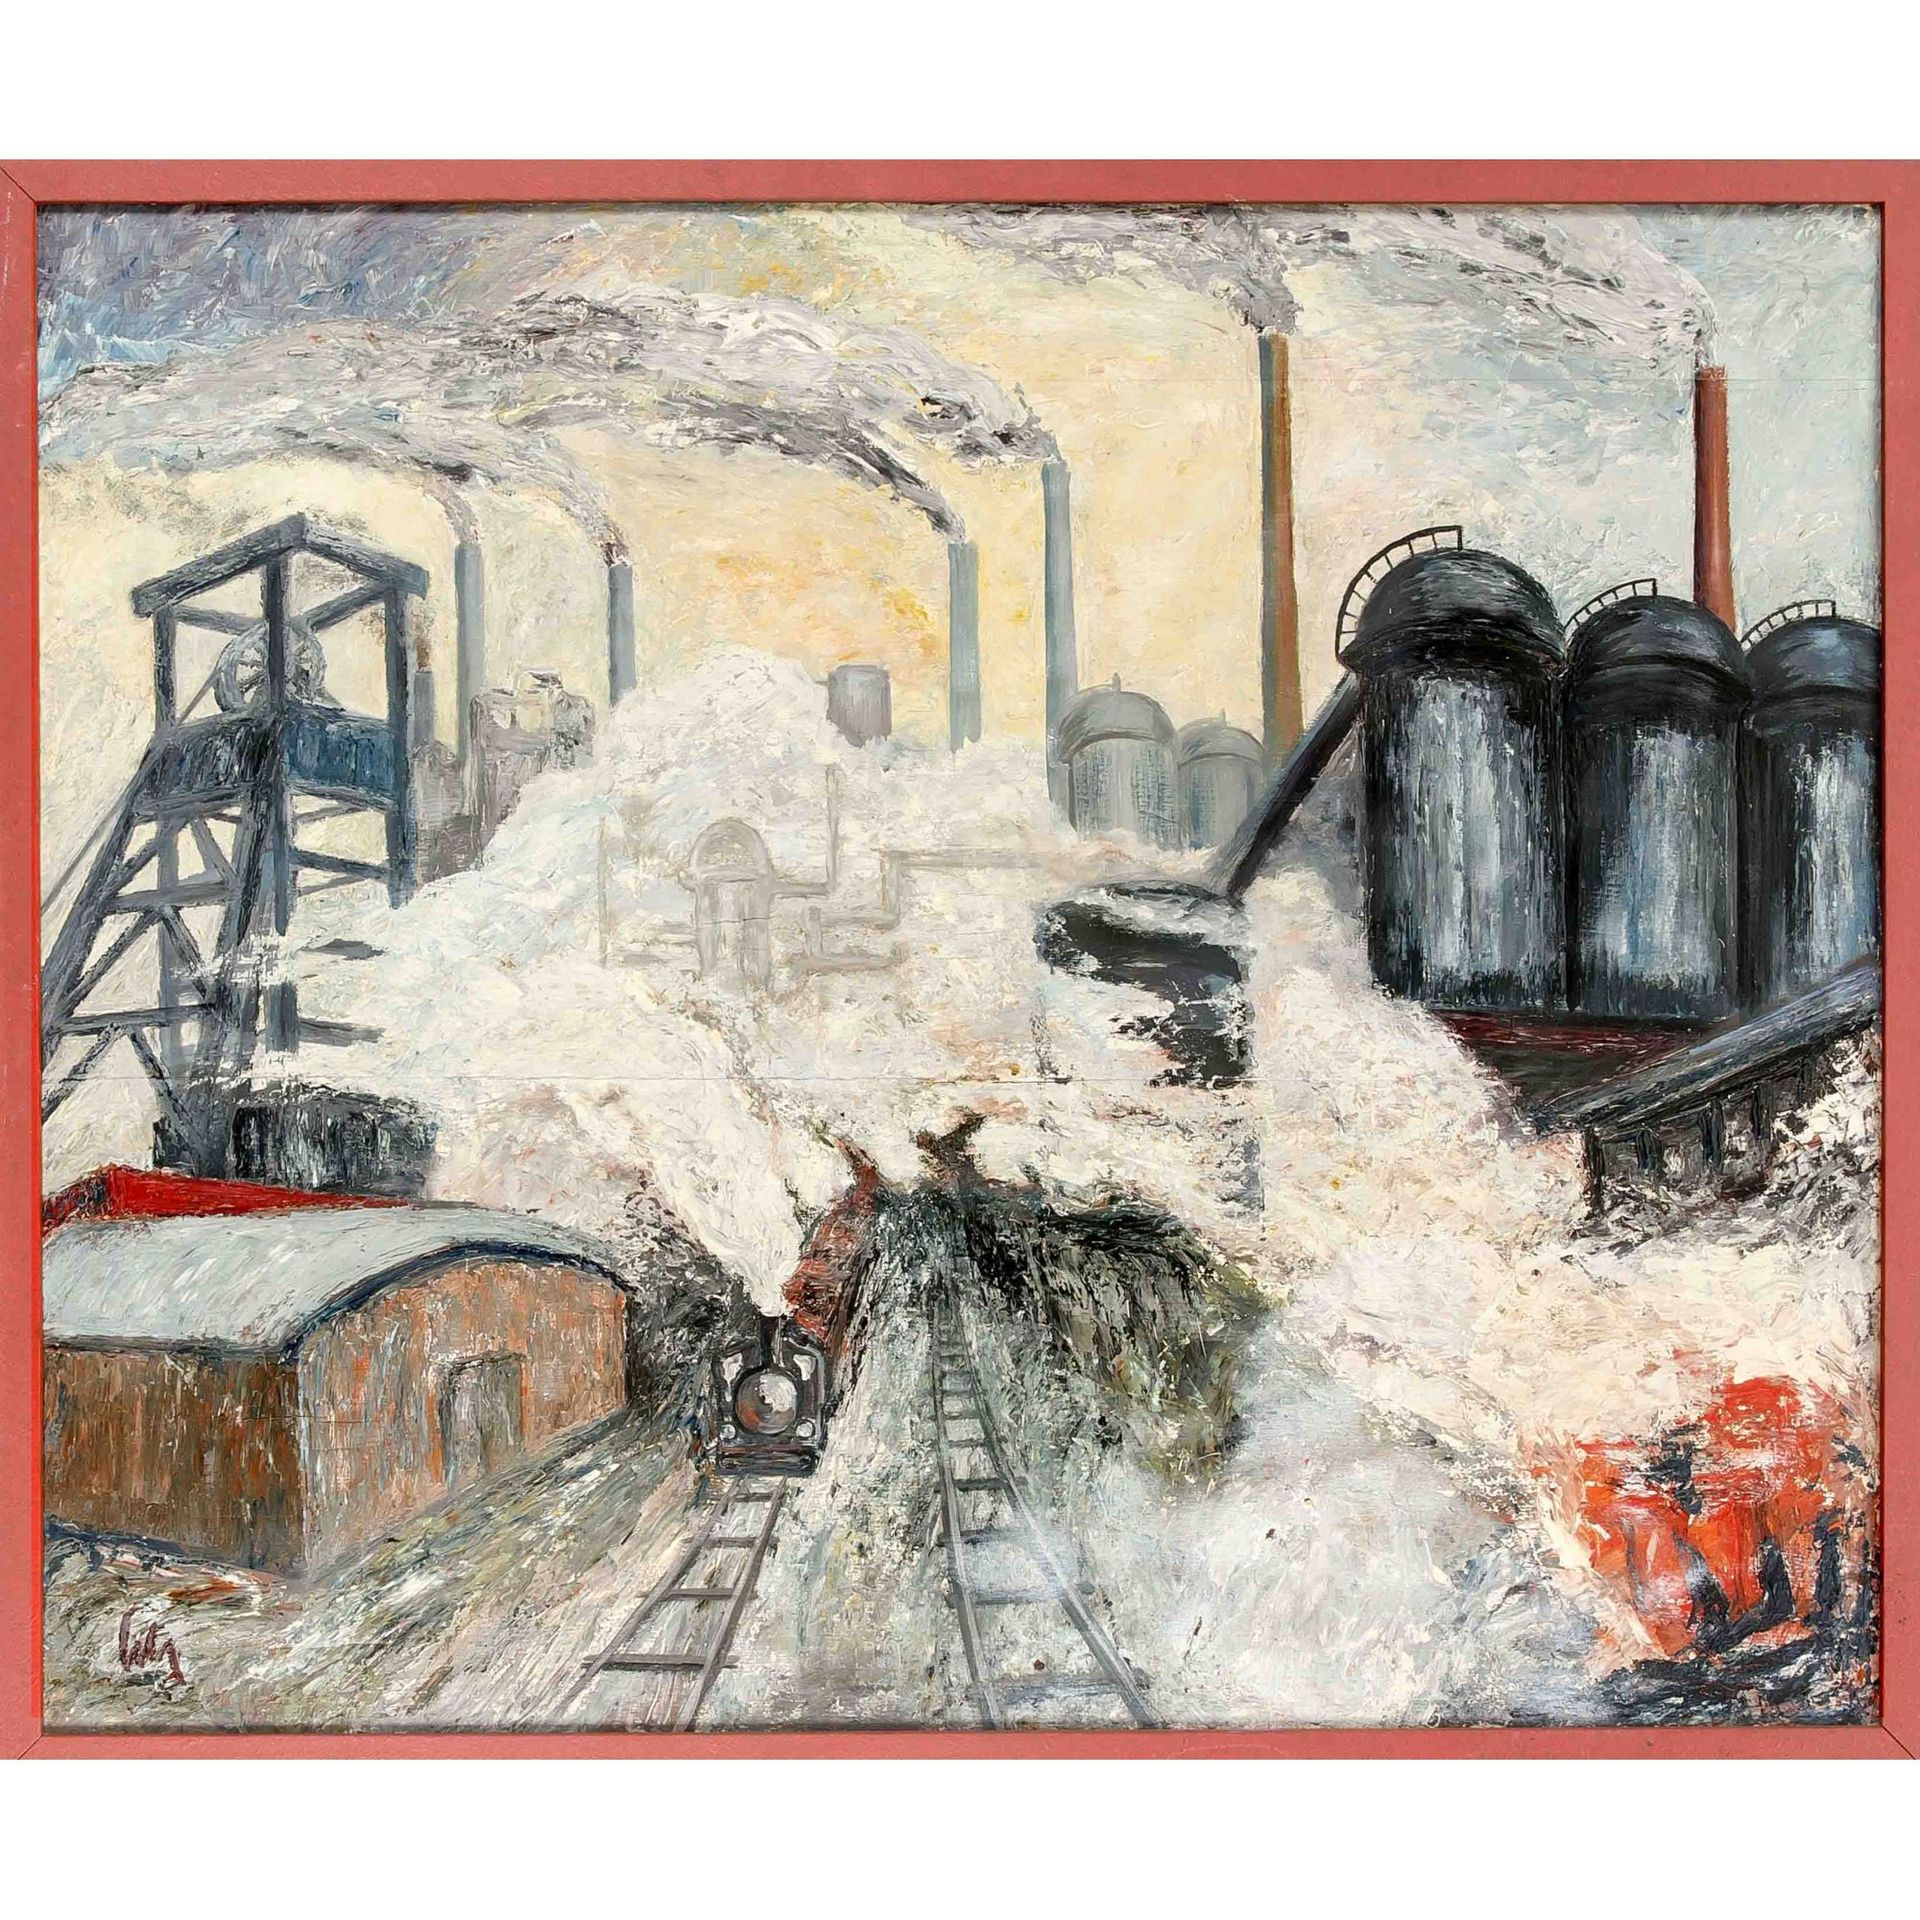 Null Unidentified painter mid-20th century, large industrial landscape with stea&hellip;